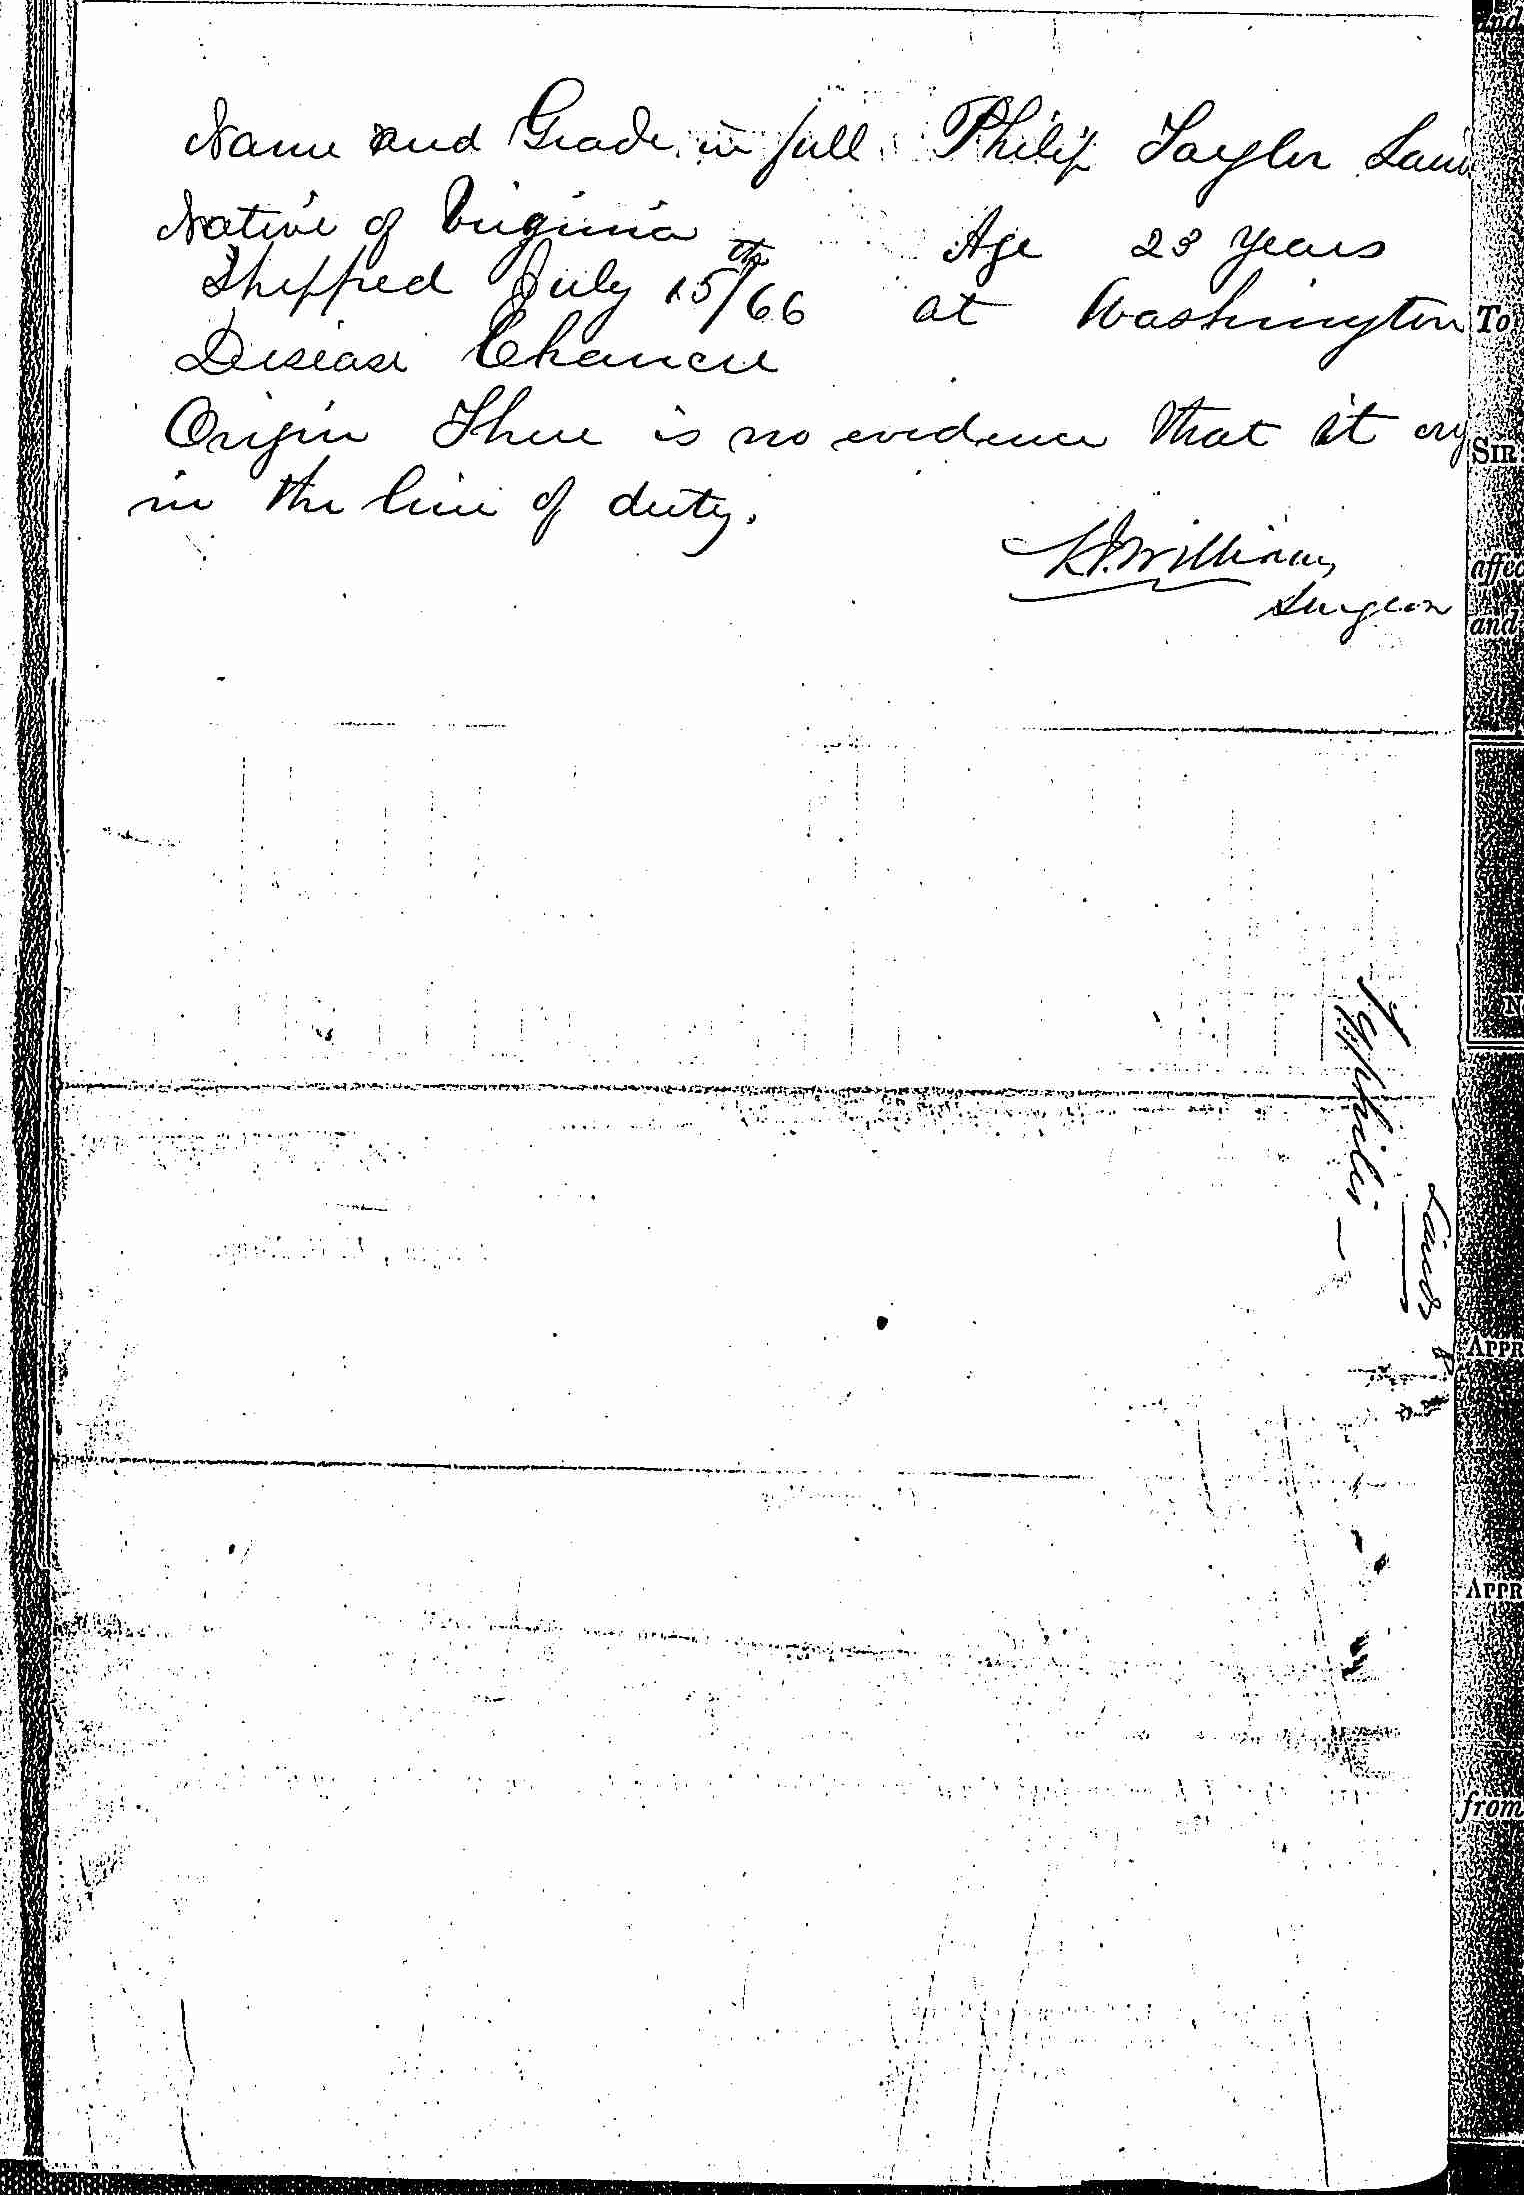 Entry for Philip Taylor (first admission page 2 of 2) in the log Hospital Tickets and Case Papers - Naval Hospital - Washington, D.C. - 1865-68